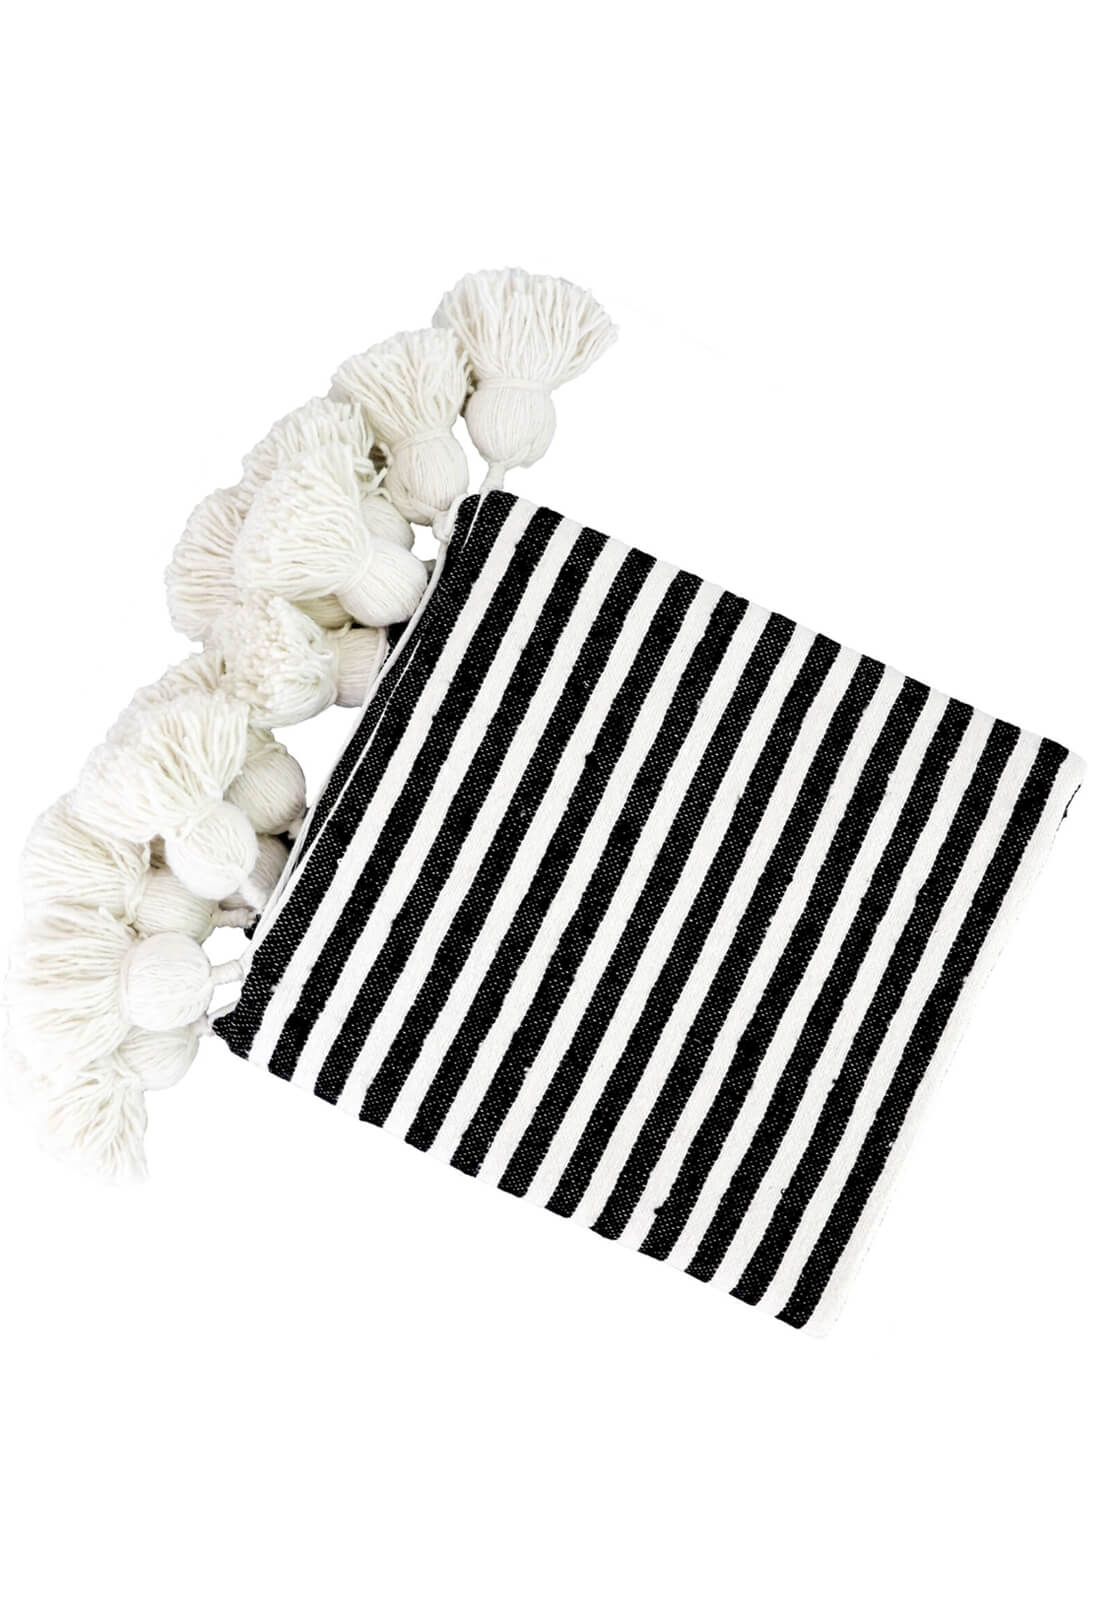 Authentic Hand Woven Moroccan Throw Blanket with Tassels - Black and White with White Tassels